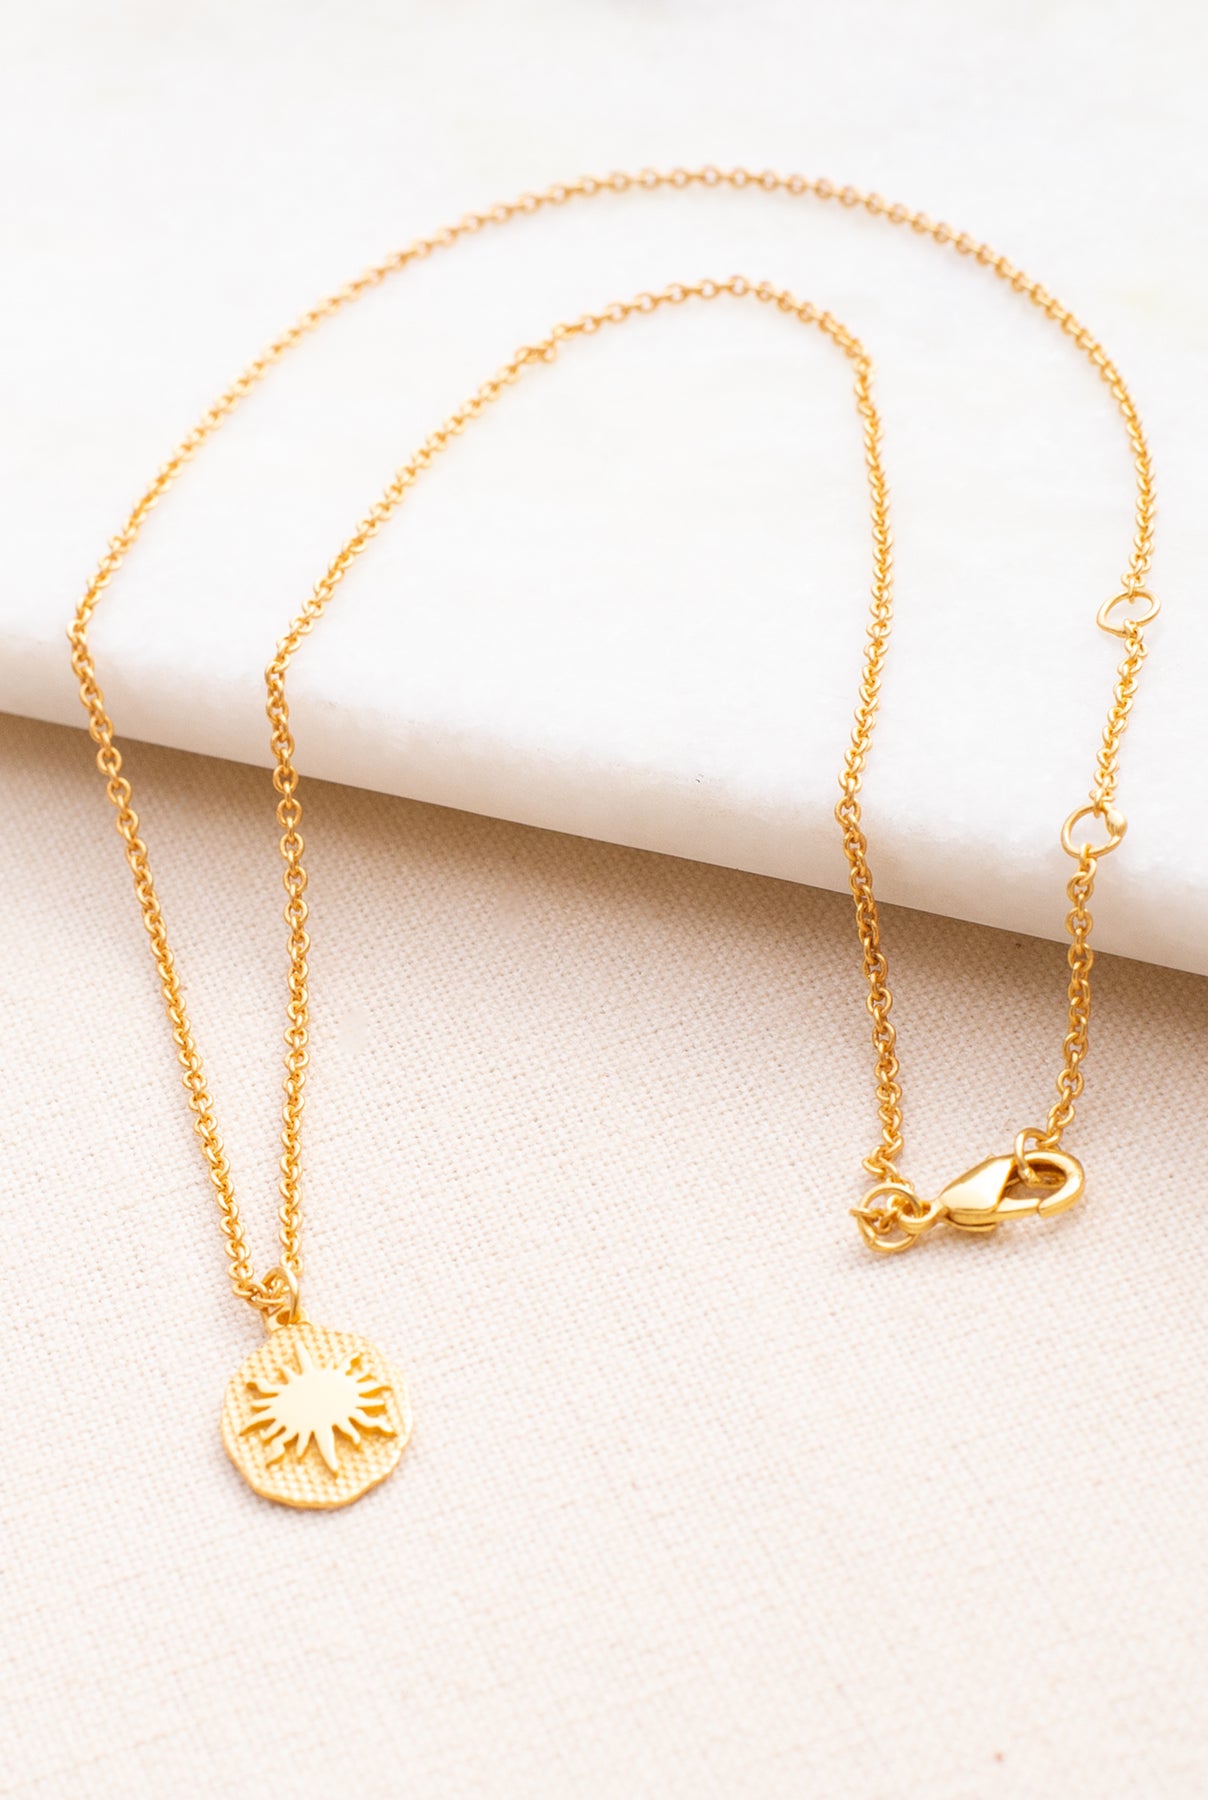 The Golden Goodness Necklace